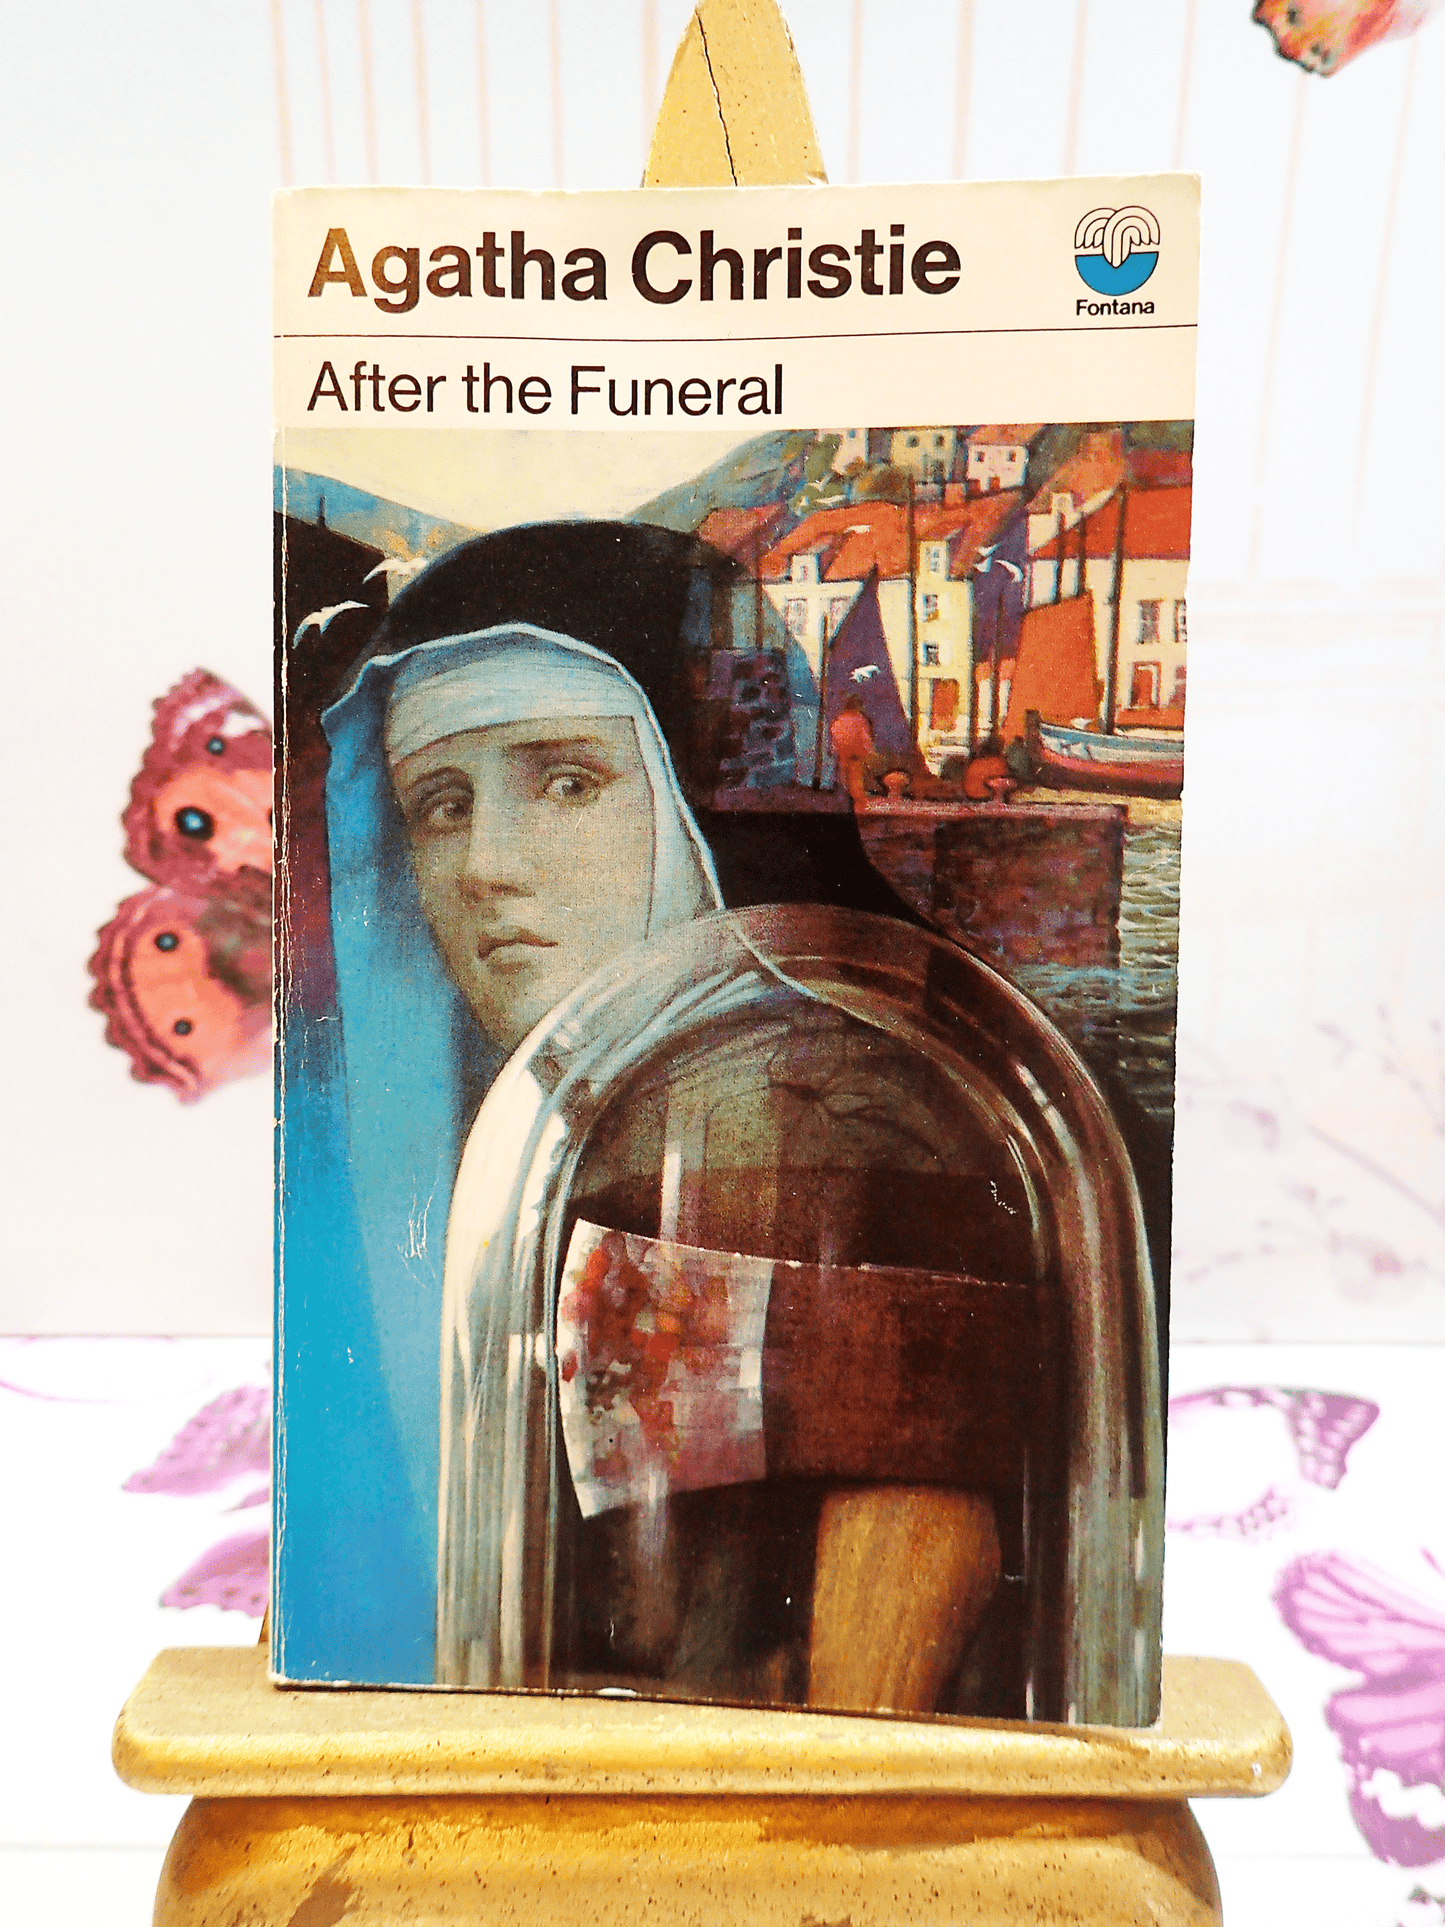 Front cover of After the Funeral by Agatha Christie Vintage Paperback Book Crime Classic 1970's, showing a Nun with an axe against a setting of quaint cottages. 